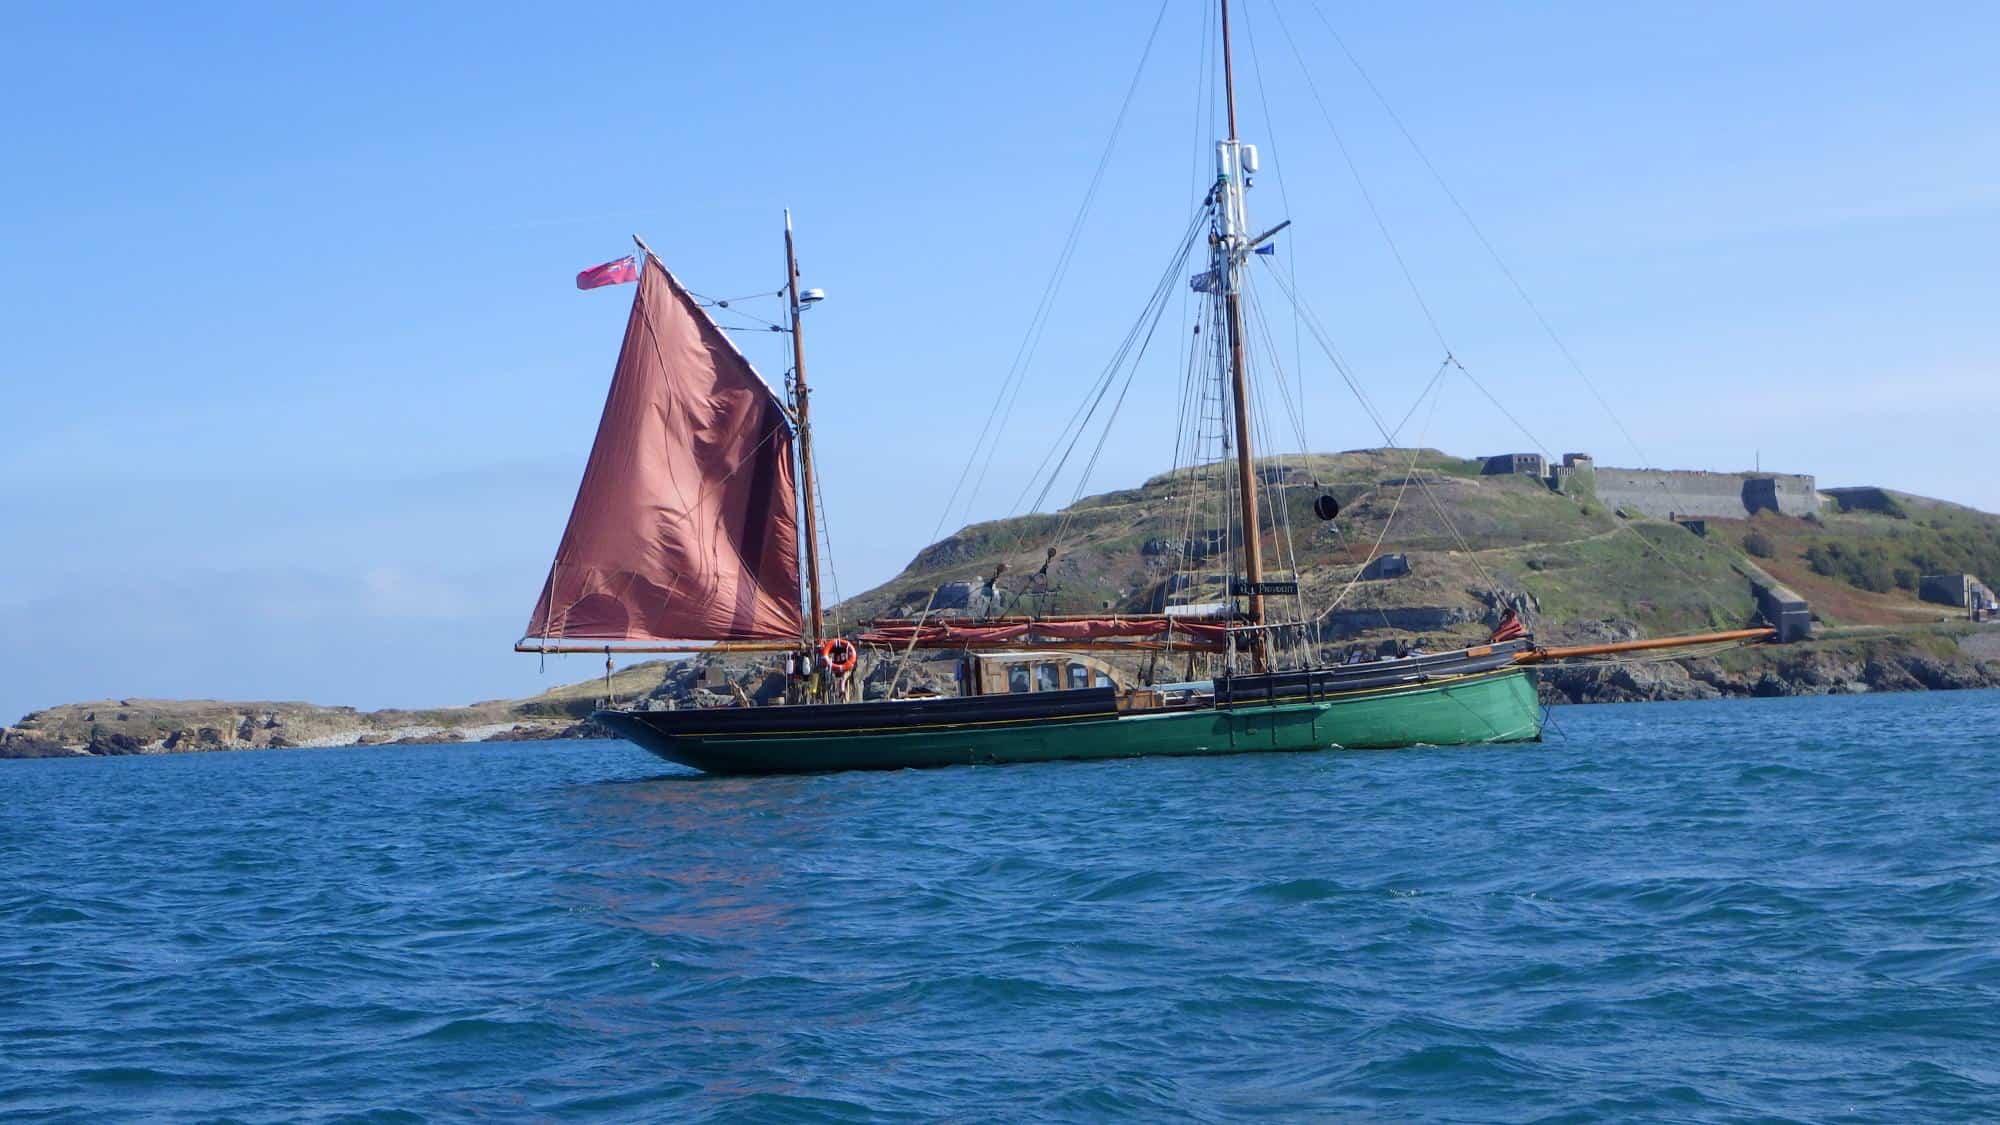 Provident at anchor by guest crew Martin Baker - Sailing Holidays on Provident with Classic Sailing